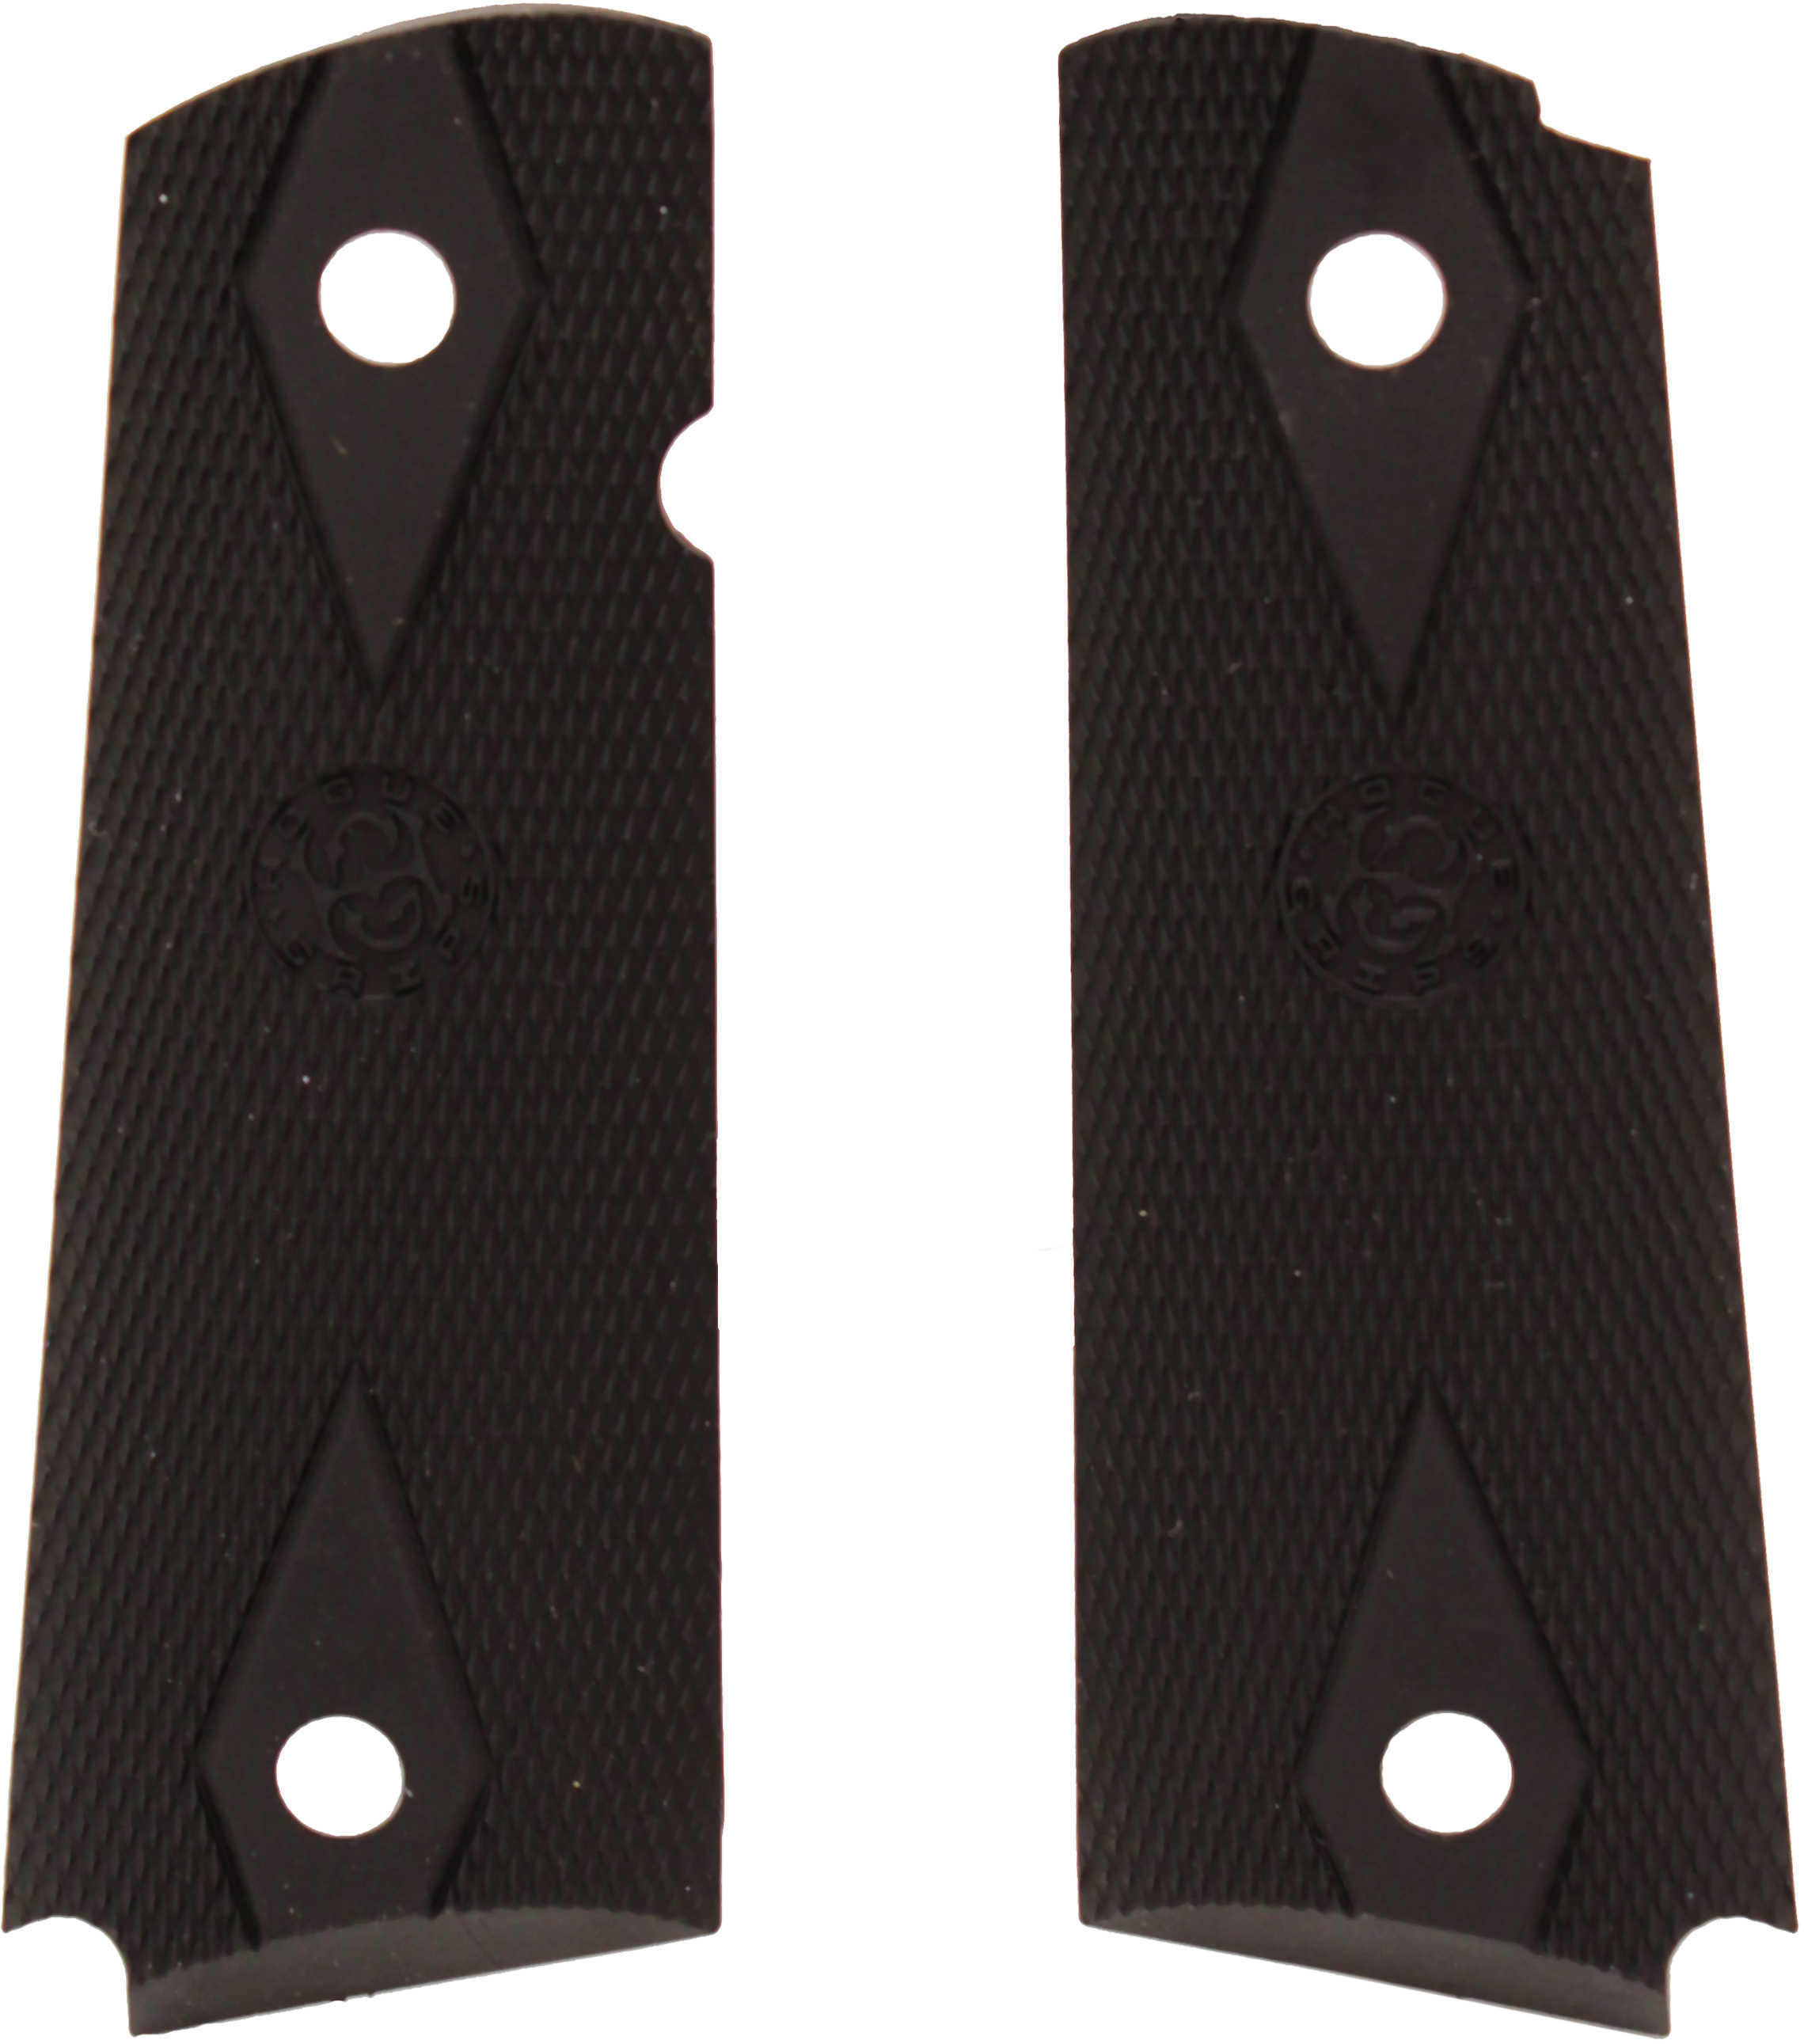 Hogue Improved Panel Grips For Colt Govenment Md: 45011